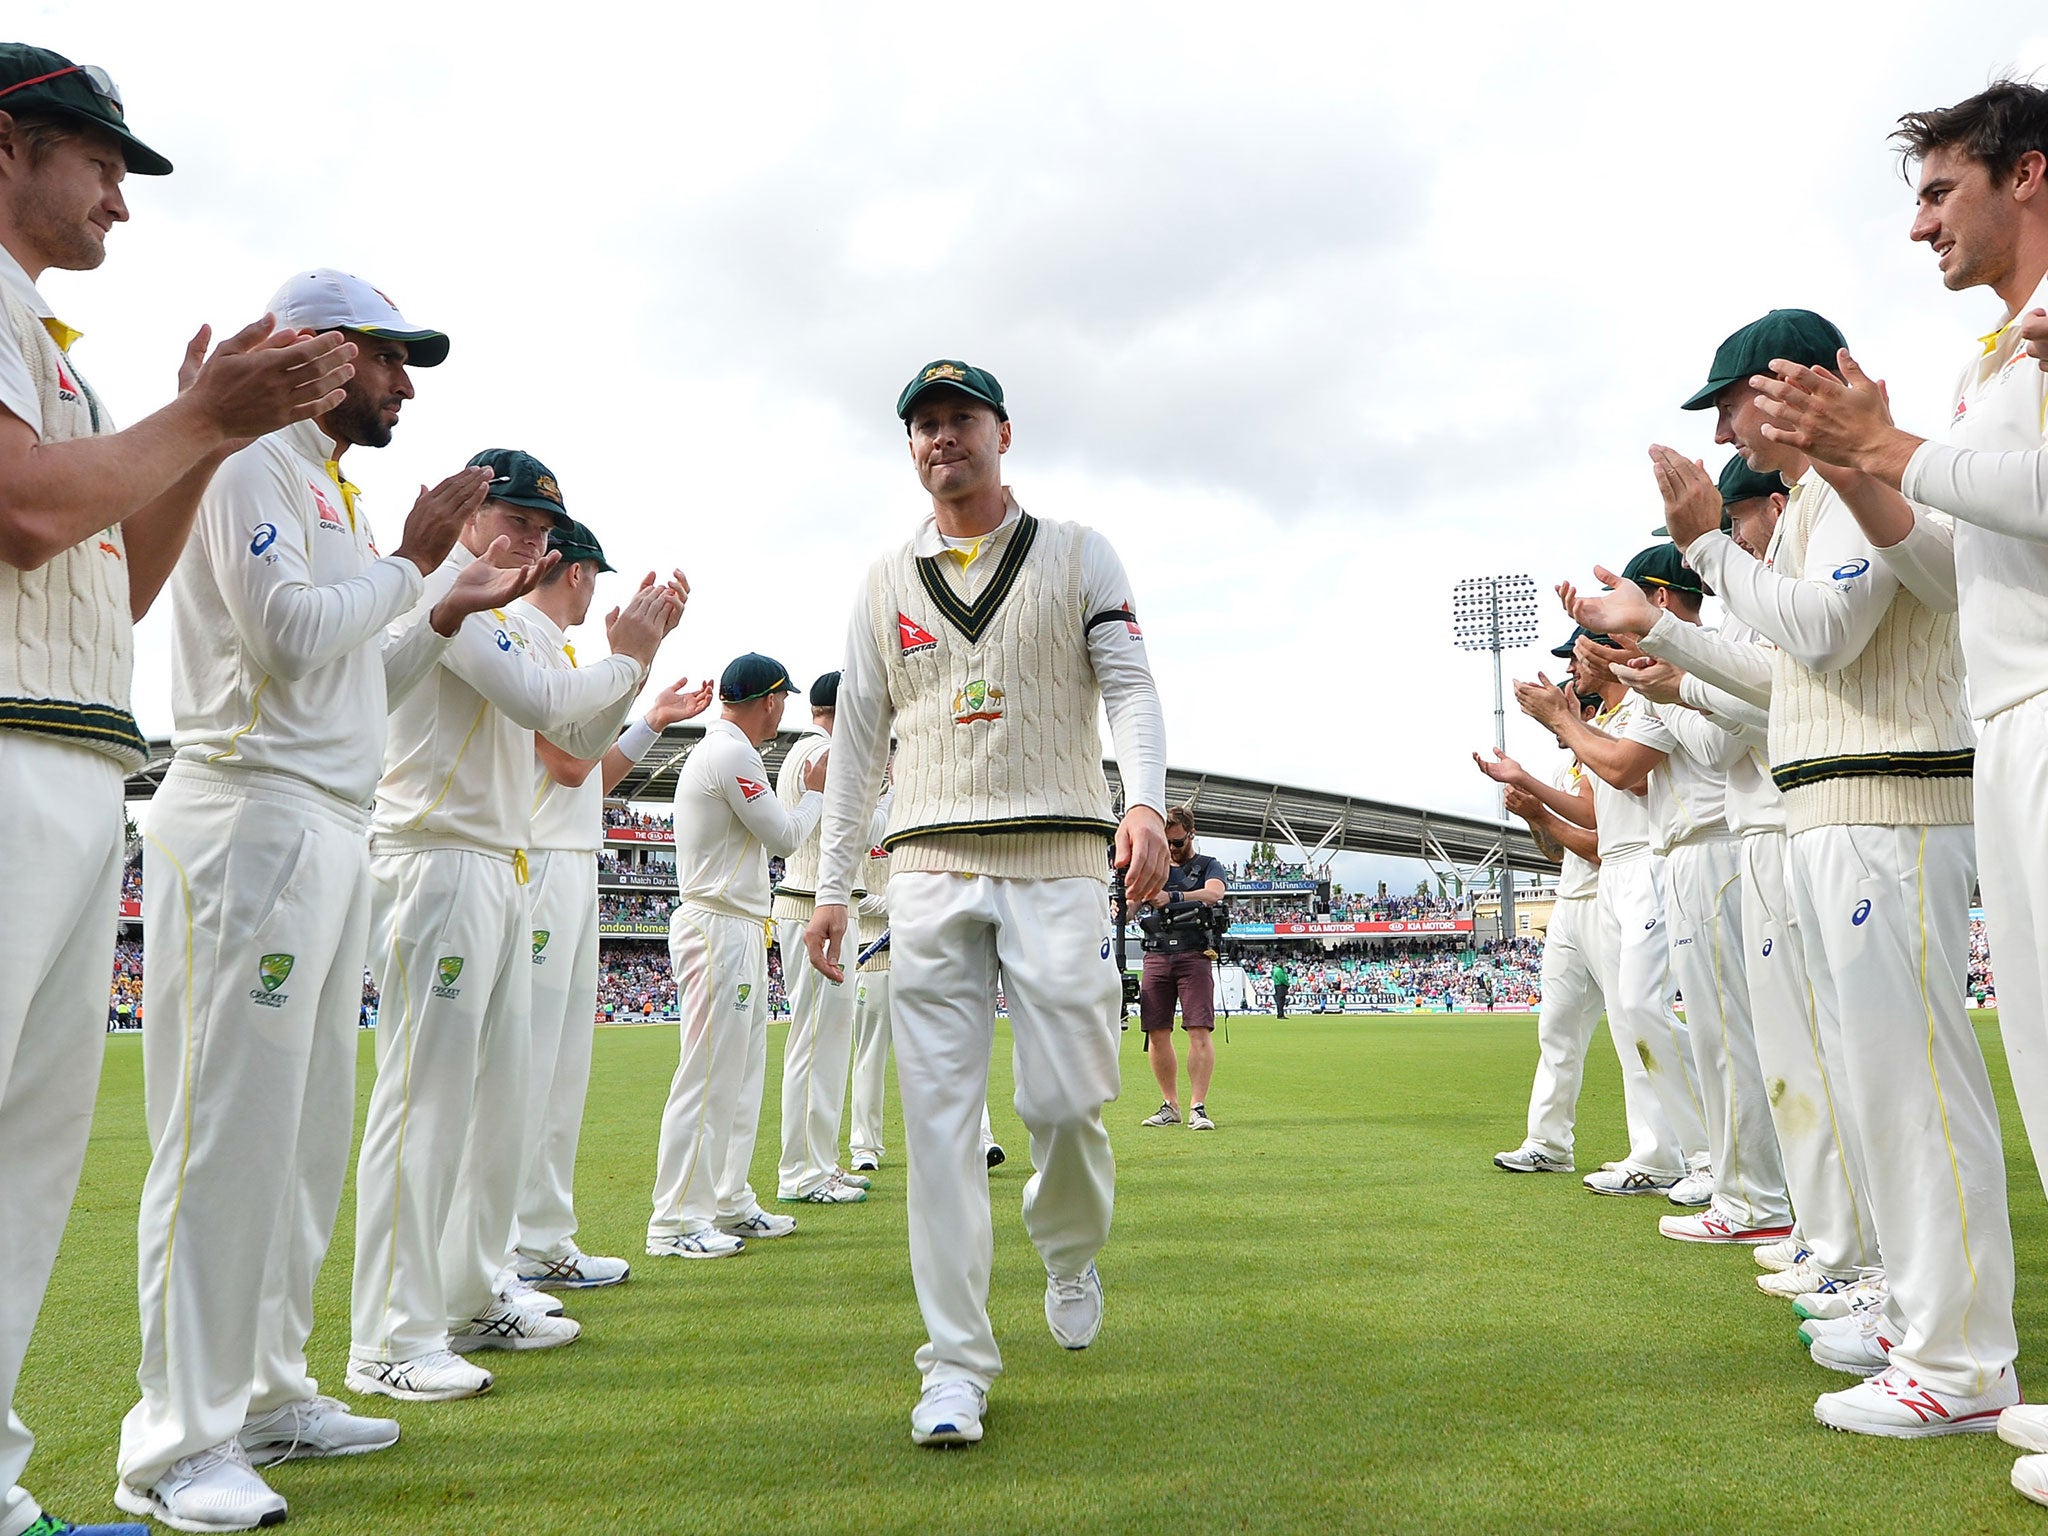 Michael Clarke has issued a strong defence of his captaincy